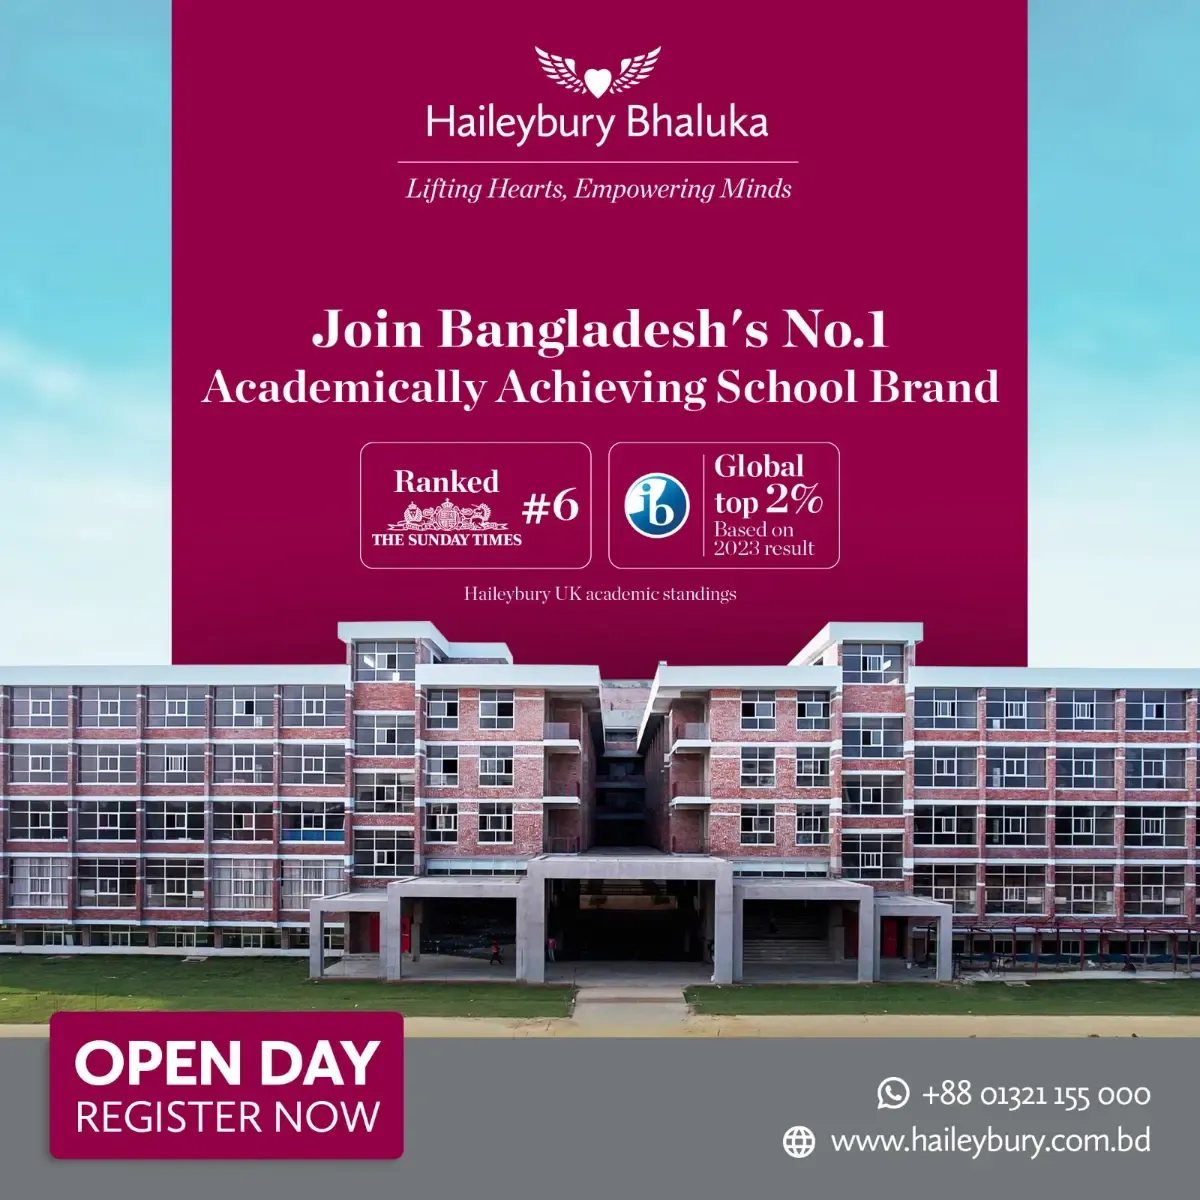 Join Bangladesh's No.1 Academically Achieving School Brand